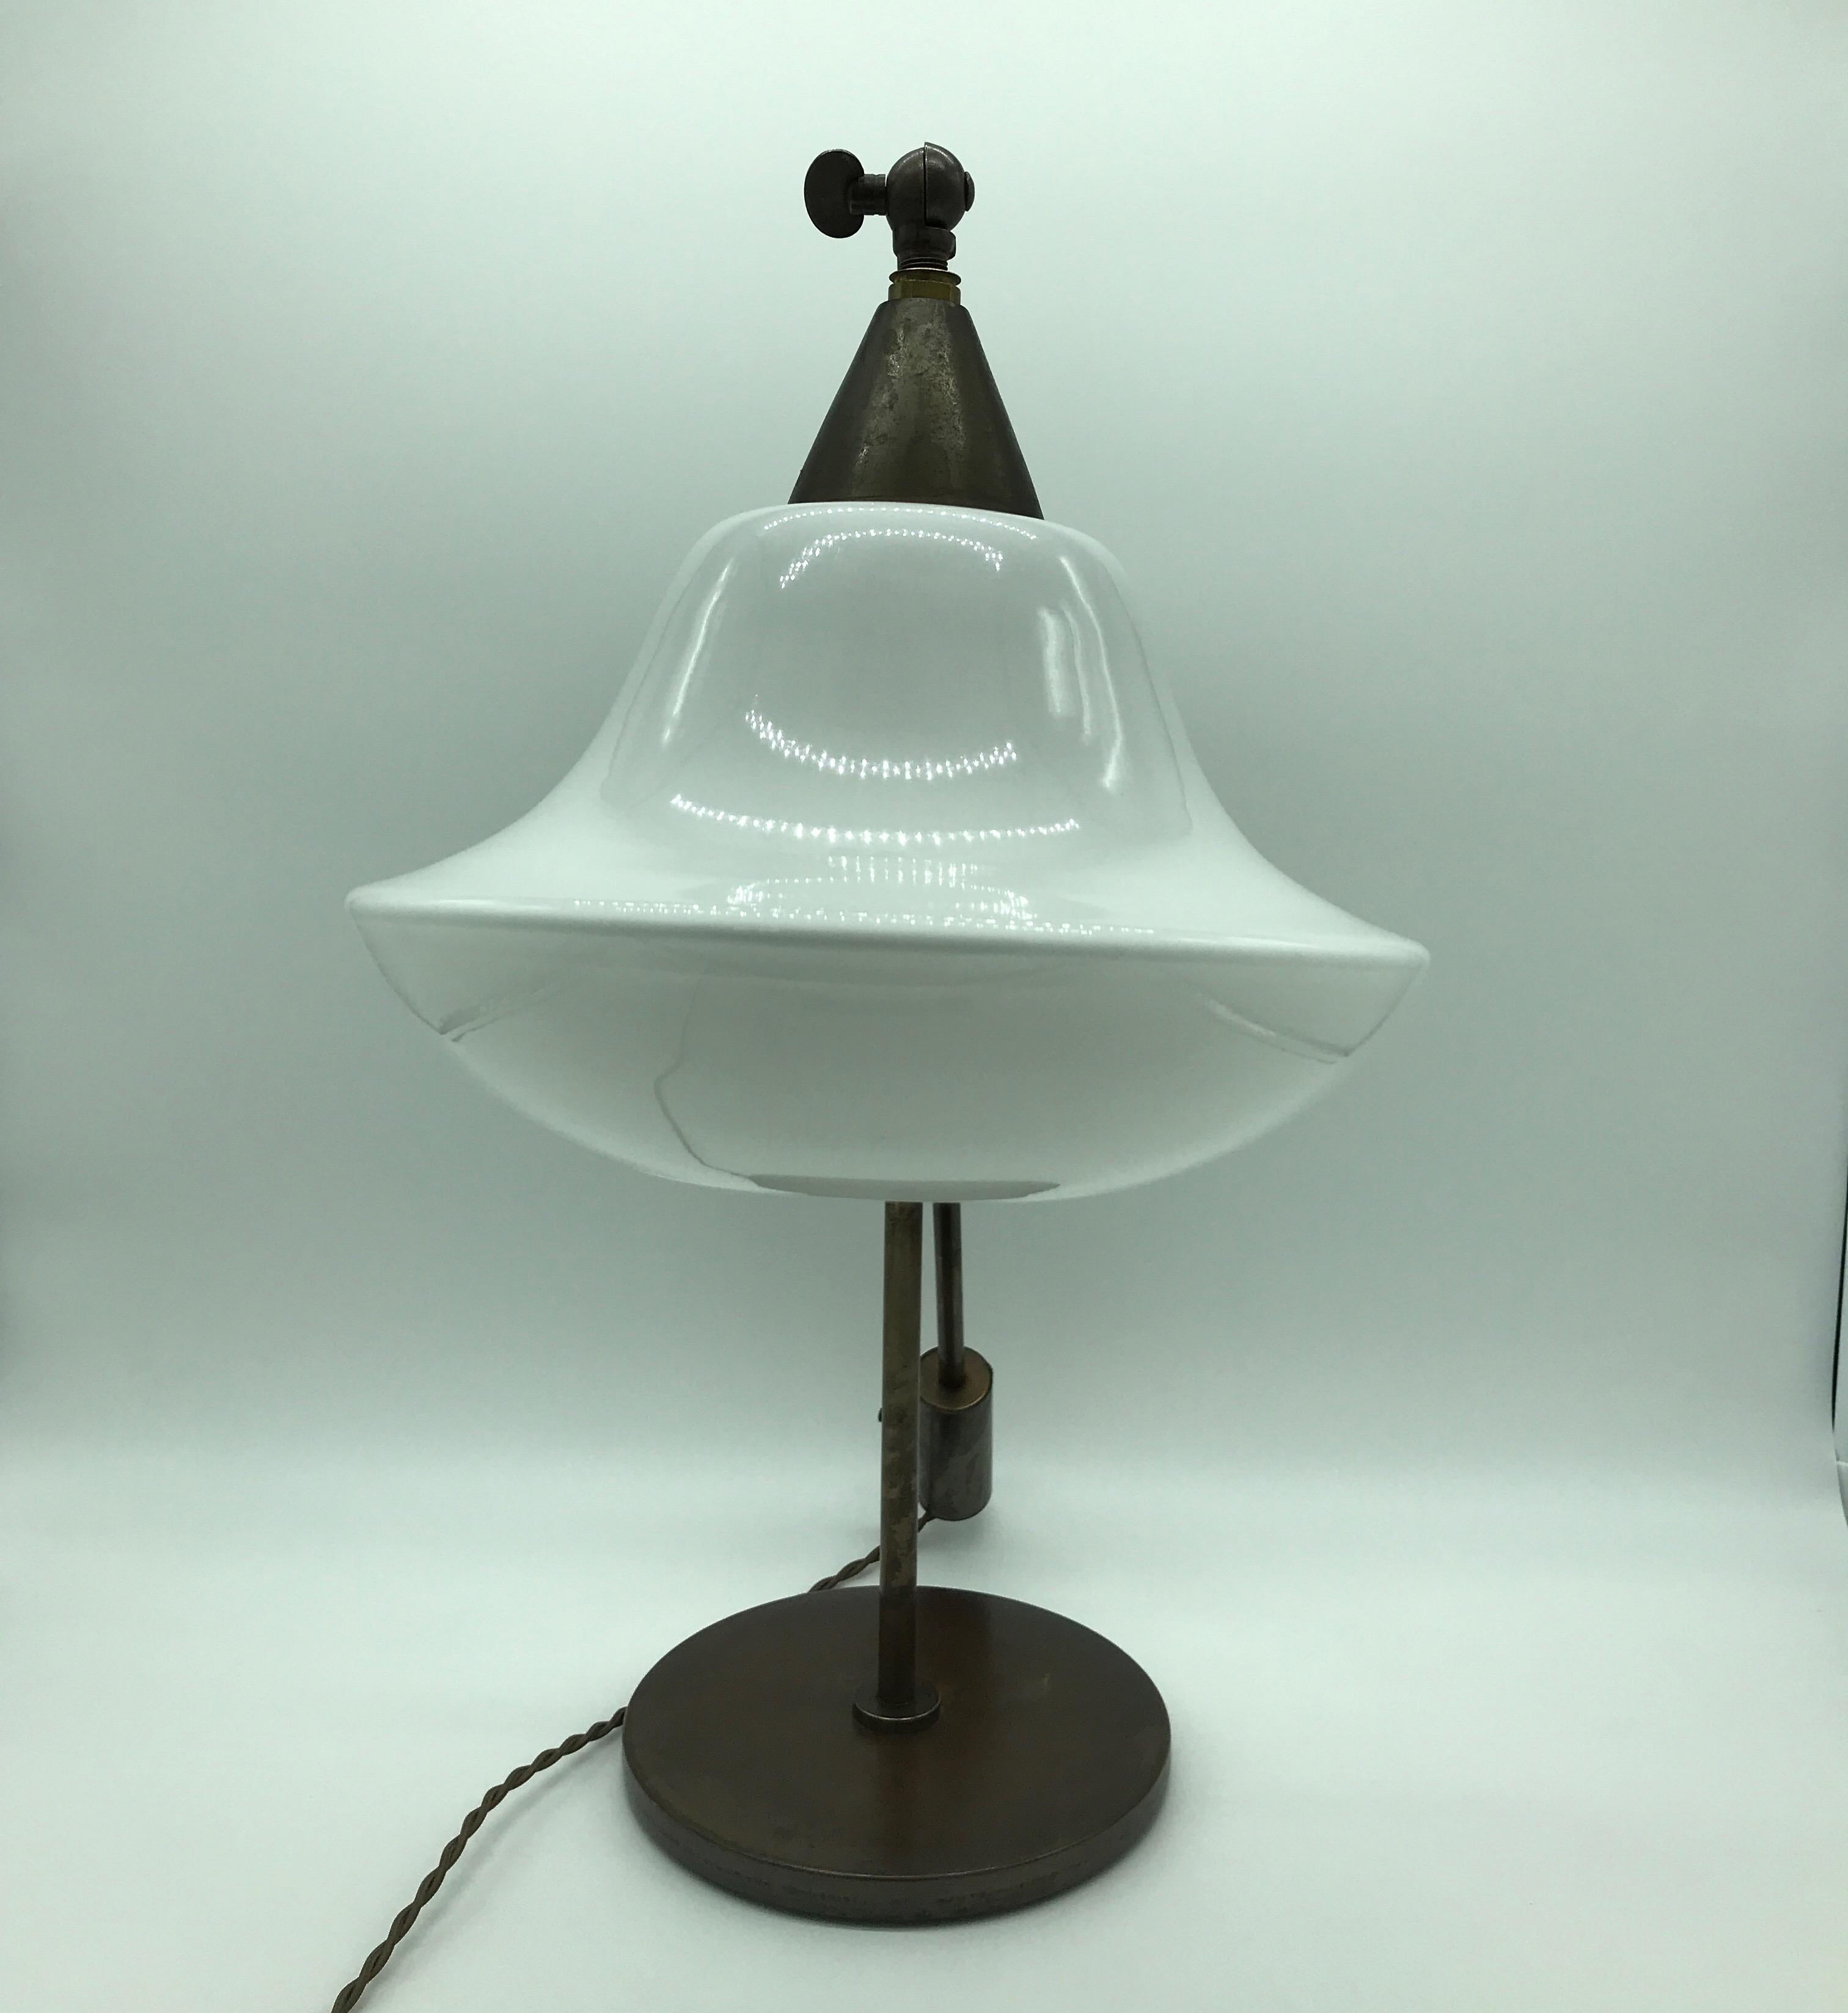 Hand-Crafted Vintage Danish Table Lamp in Copper with an Opaline Glass Shade from the 1950s